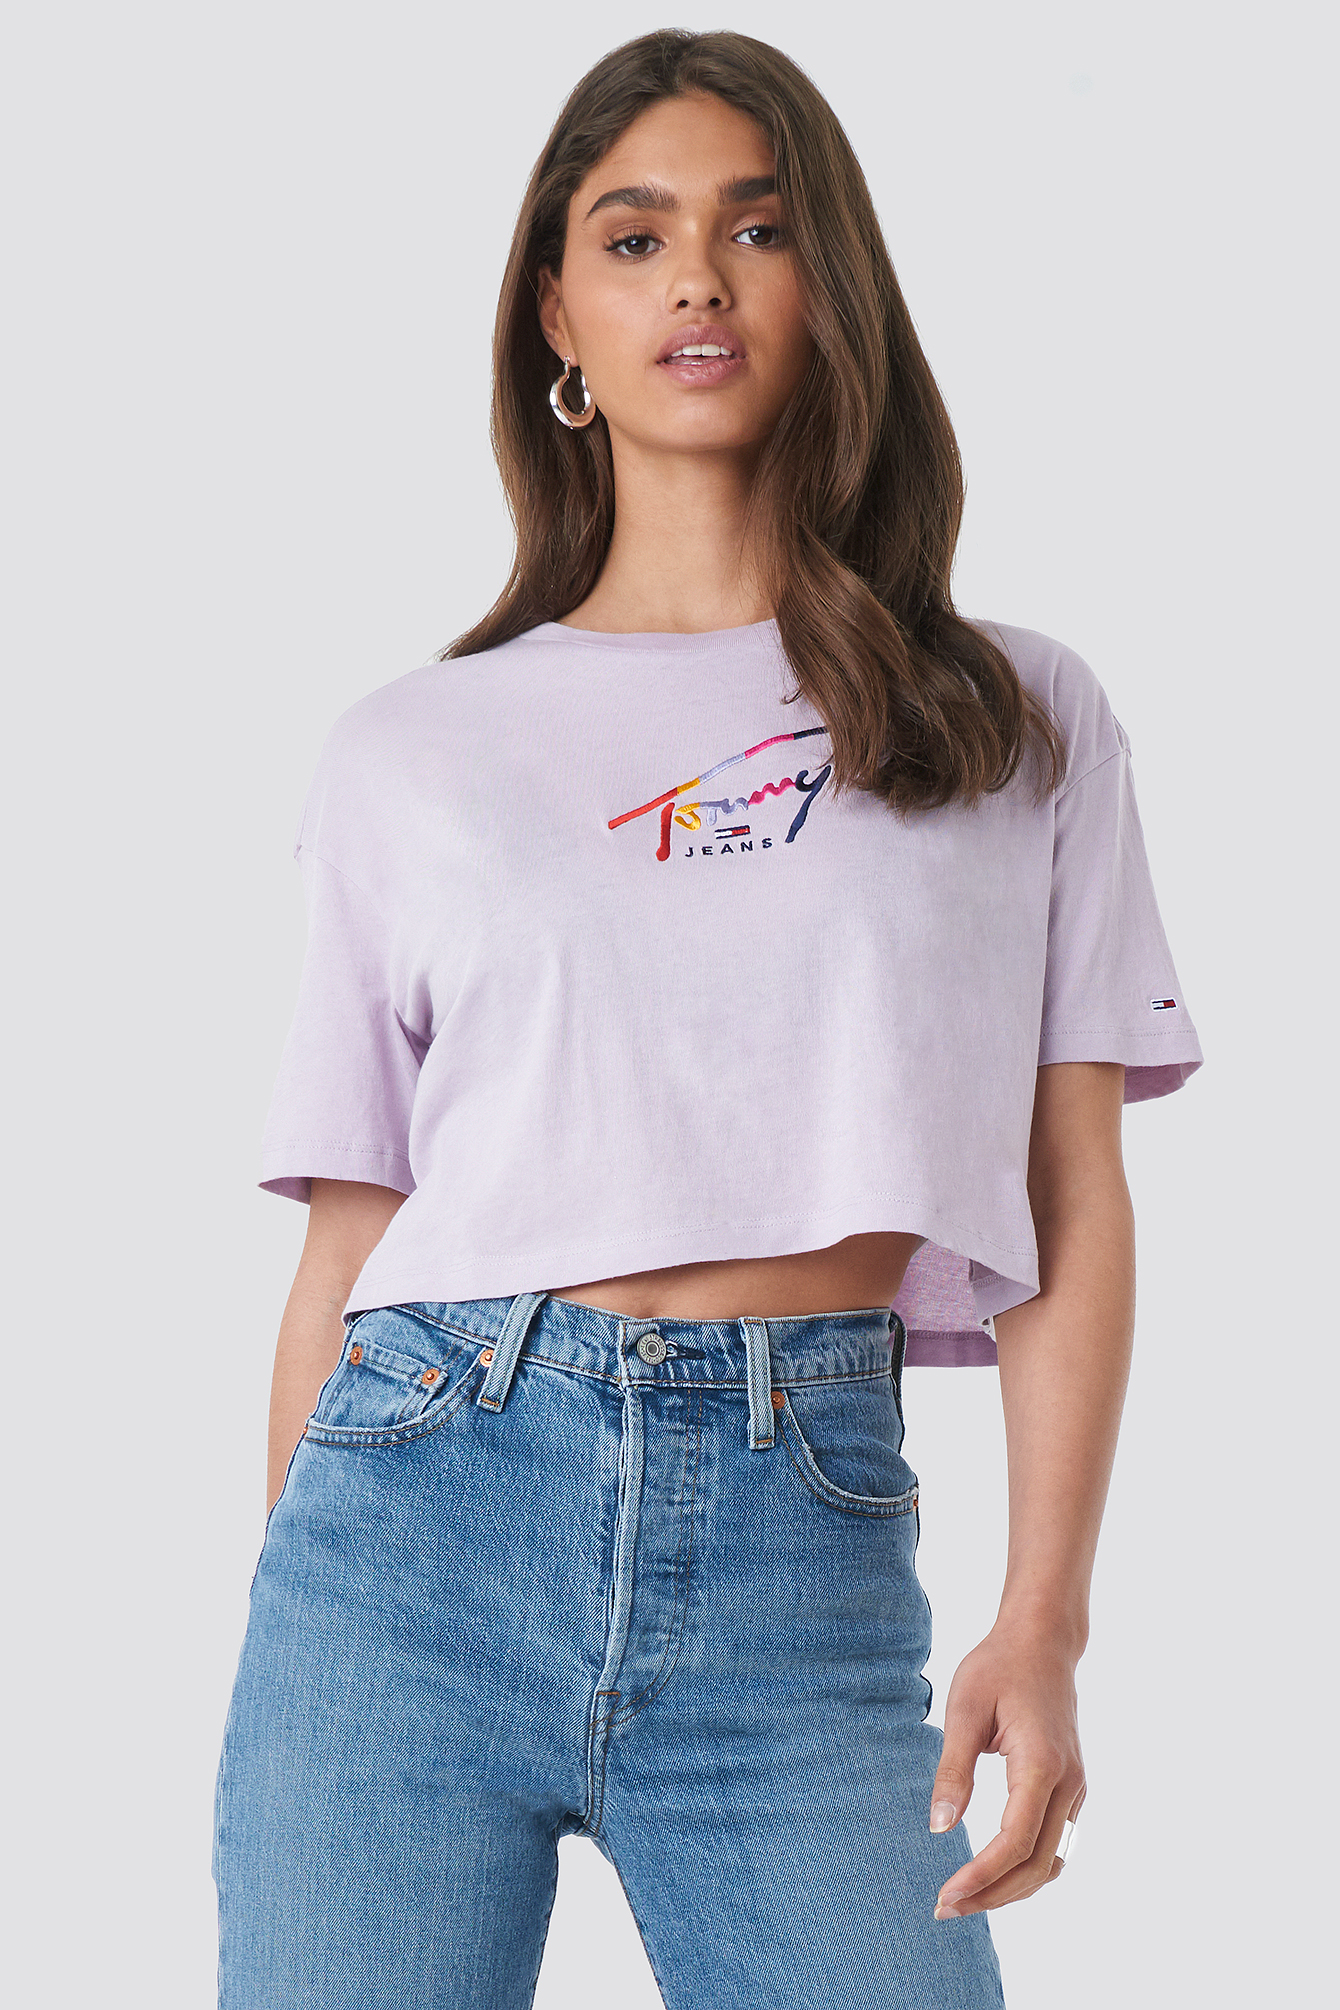 tommy jeans crop top